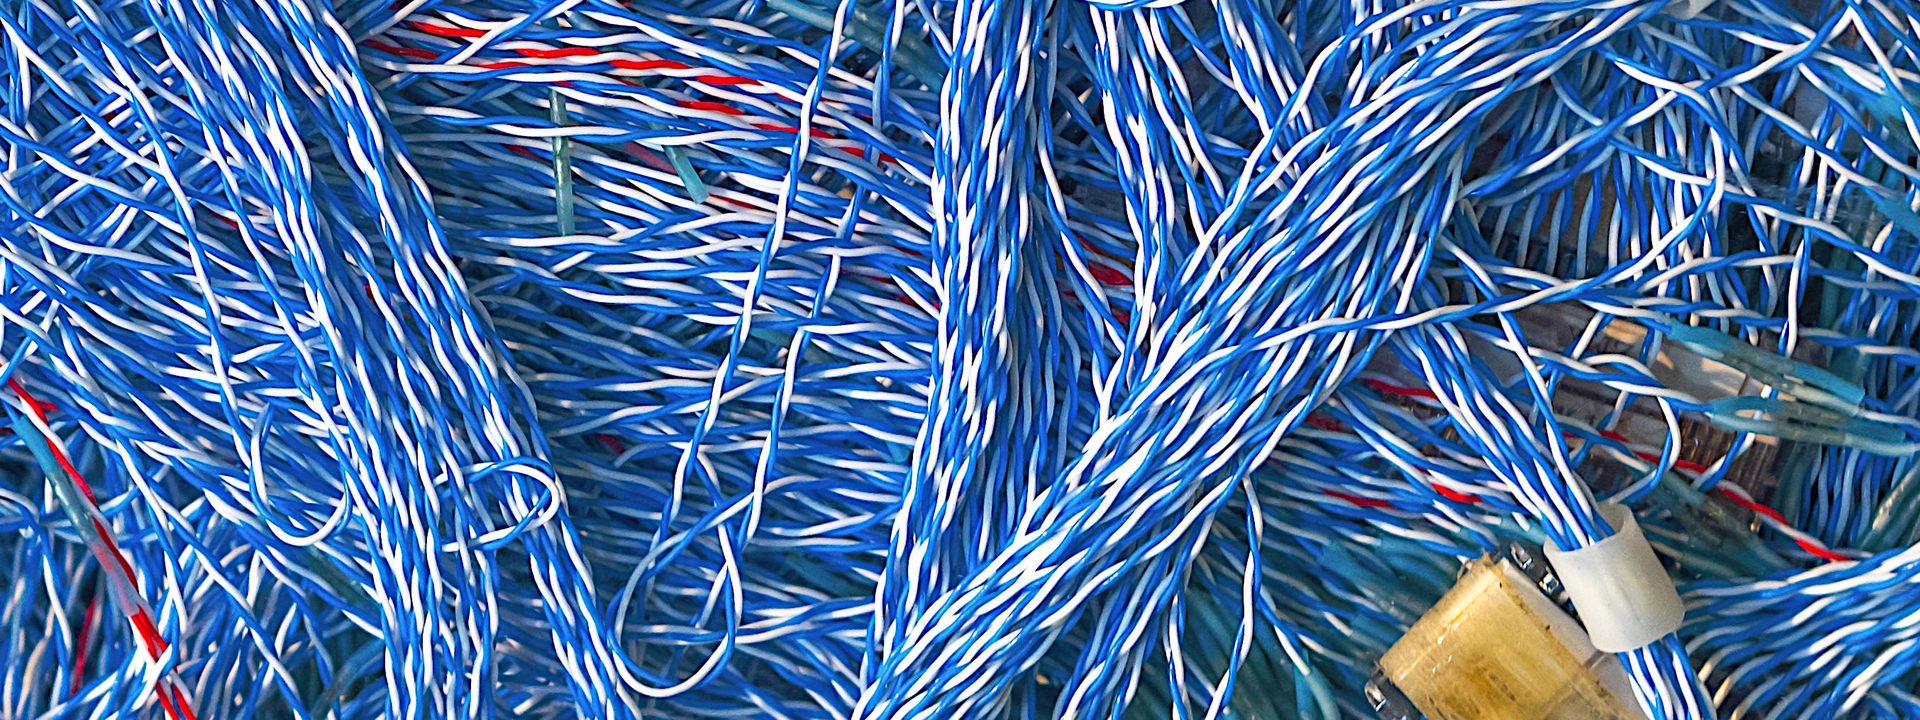 A few red wires can be seen among a maze of blue-white wires and cable harnesses.